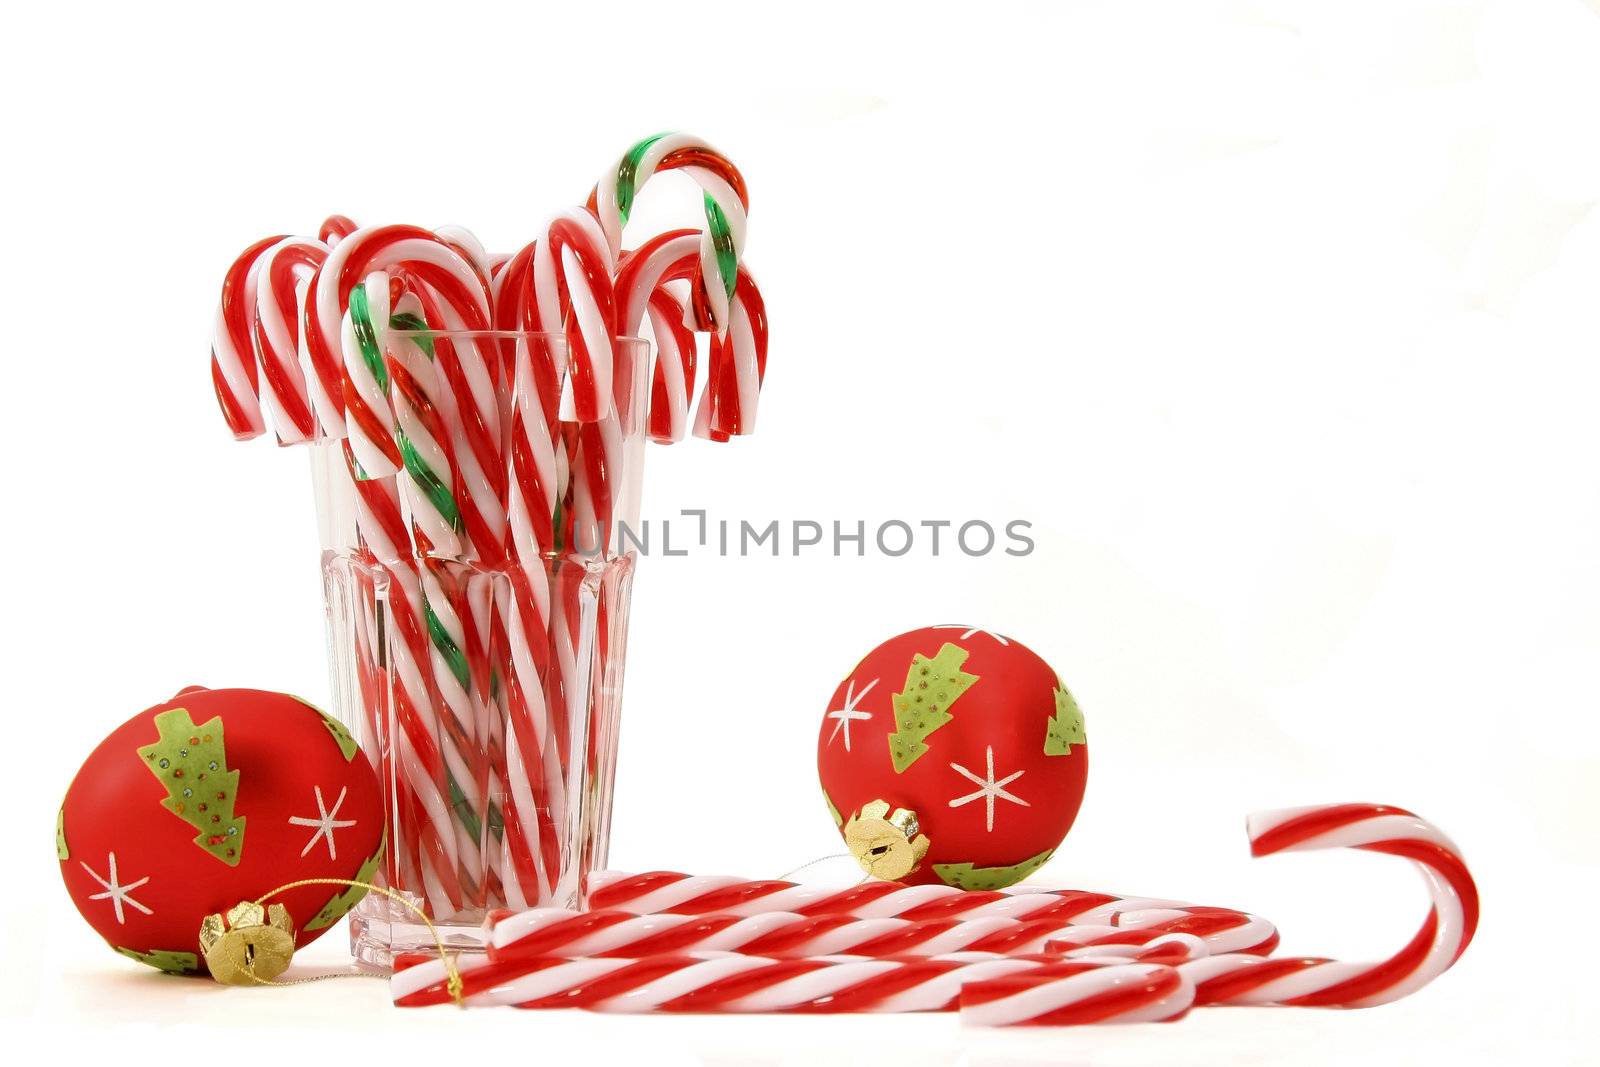 Candy canes in a glass